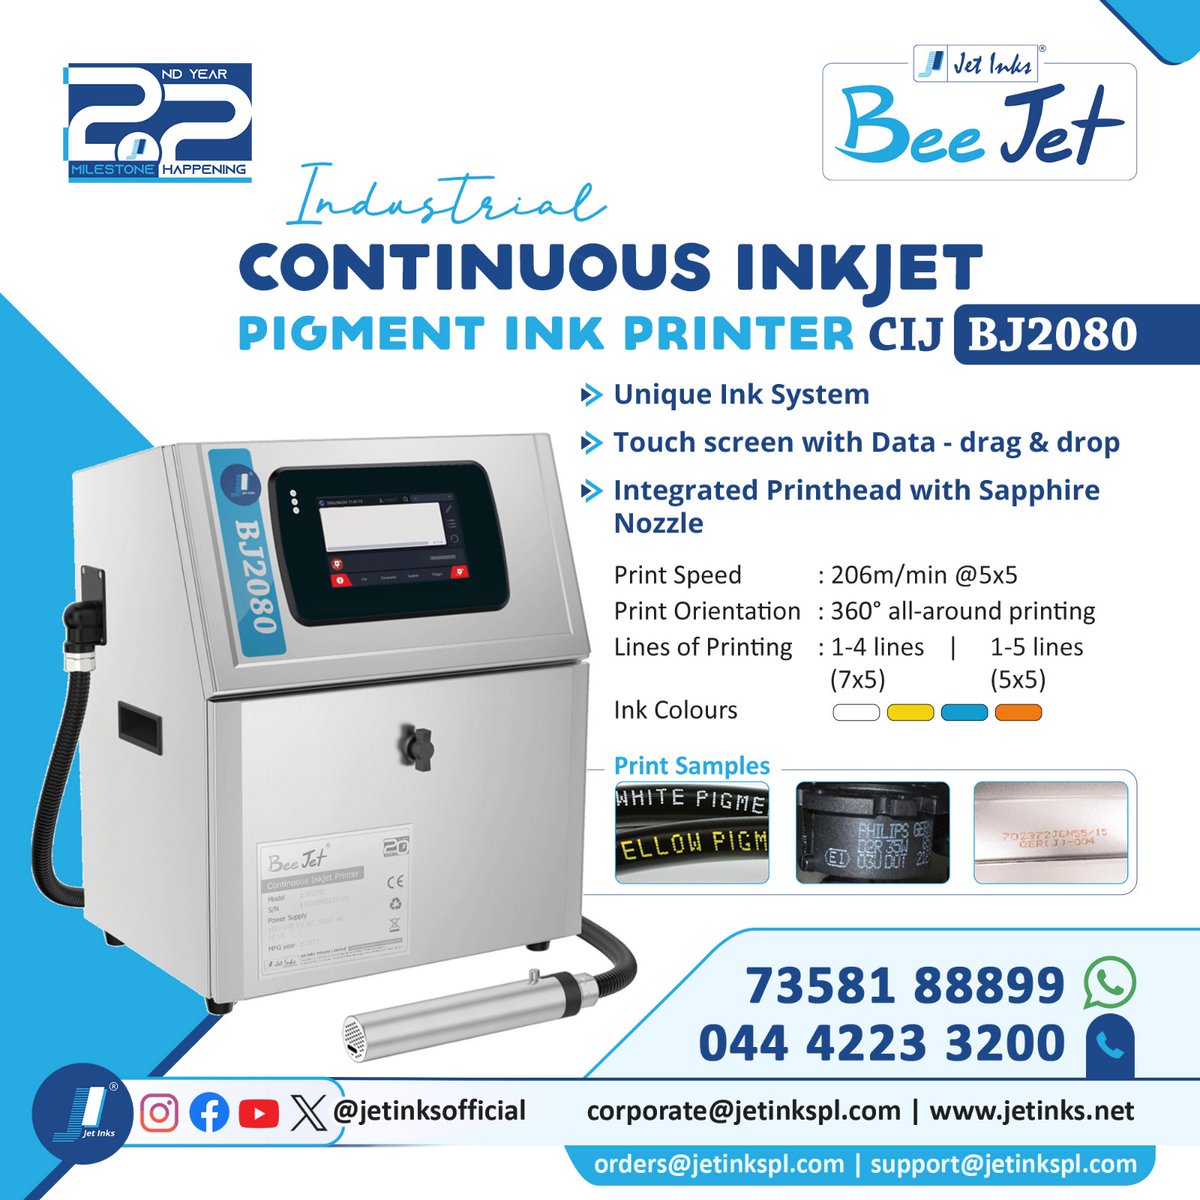 #Bee_Jet® BJ2080 Continuous Inkjet Pigment Ink Printer by #Jet_Inks® India

Visit: jetinks.net

#cijprinter #continuousinkjetprinter #industrialprinting #fmcg #fmcgindustry #pharmapackaging #packagingindustry #pvcpipe #steel #cable #metal #packaging #jetinksofficial